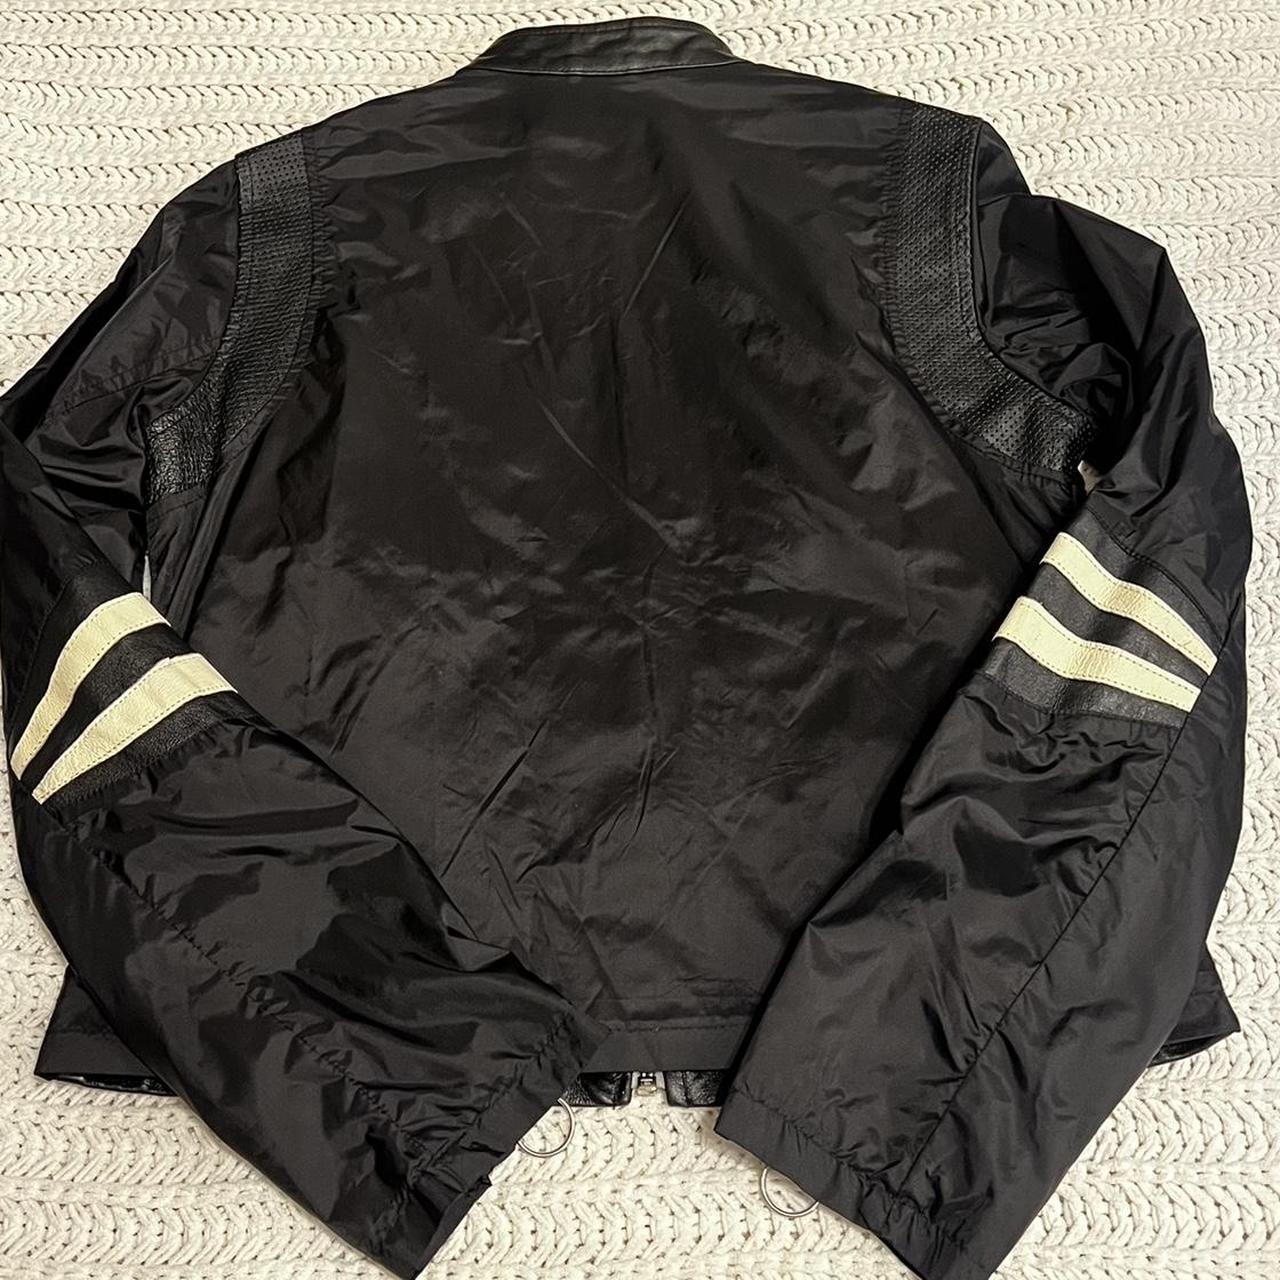 Wilson’s Leather Women's Black and White Jacket (6)